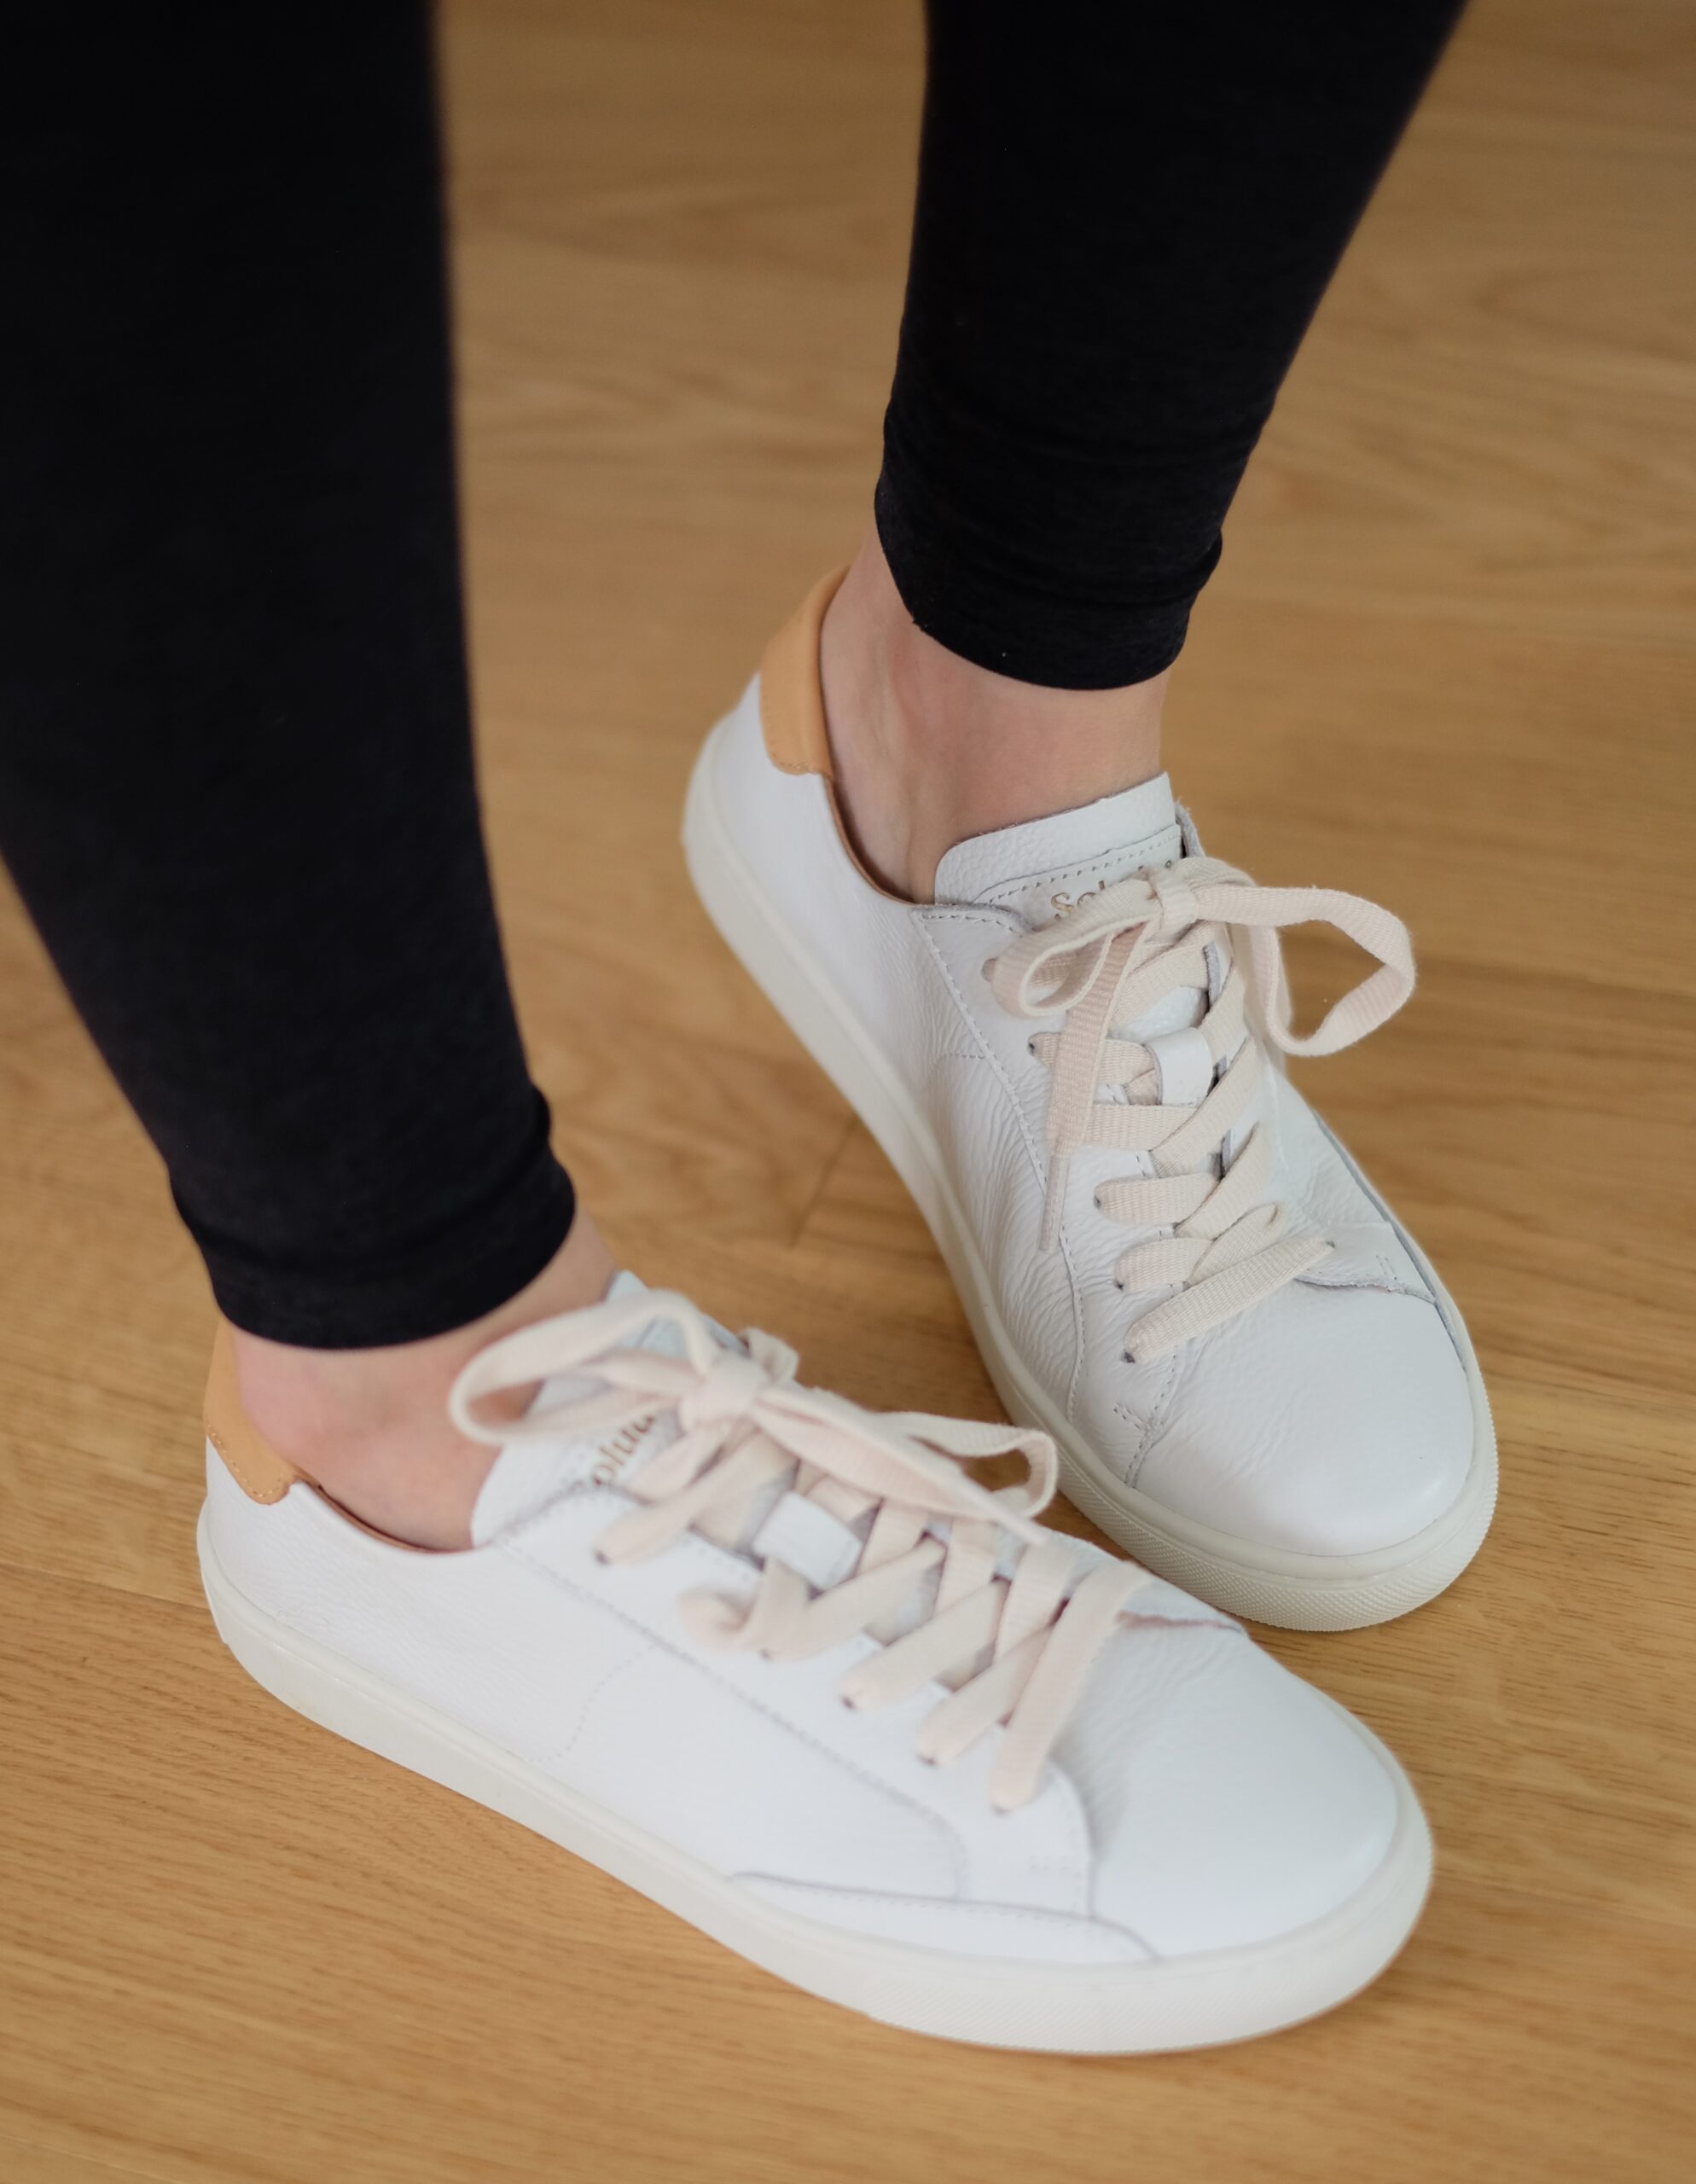 Soludos The Original Ibiza Sneakers Review and Pictures